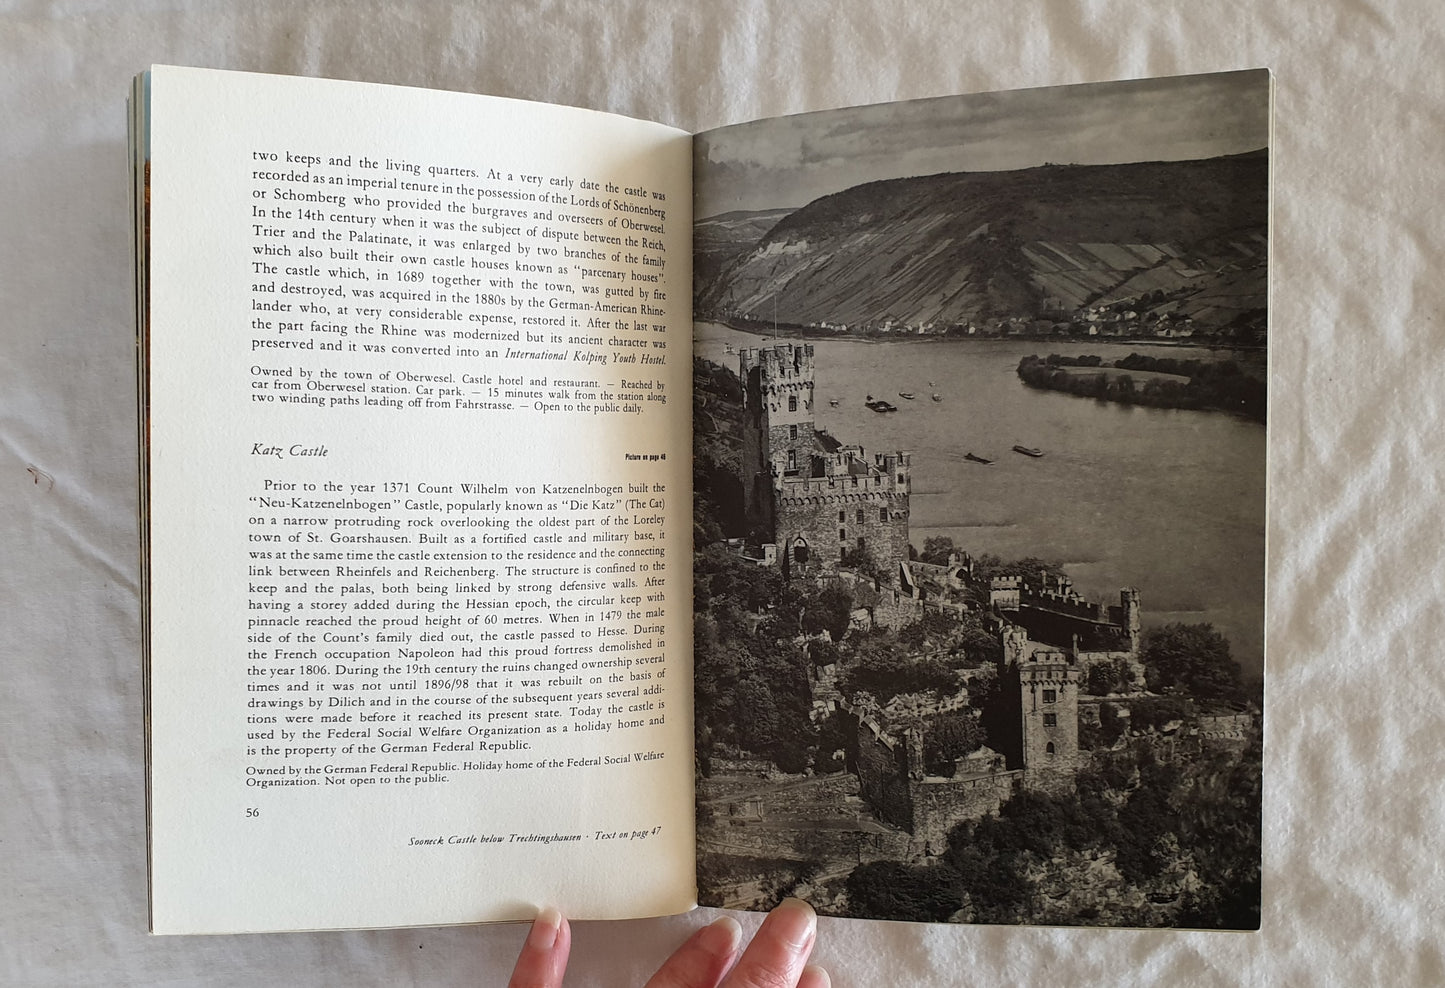 Castles on the Rhine by Dr. Walther Ottendordd-Simrock